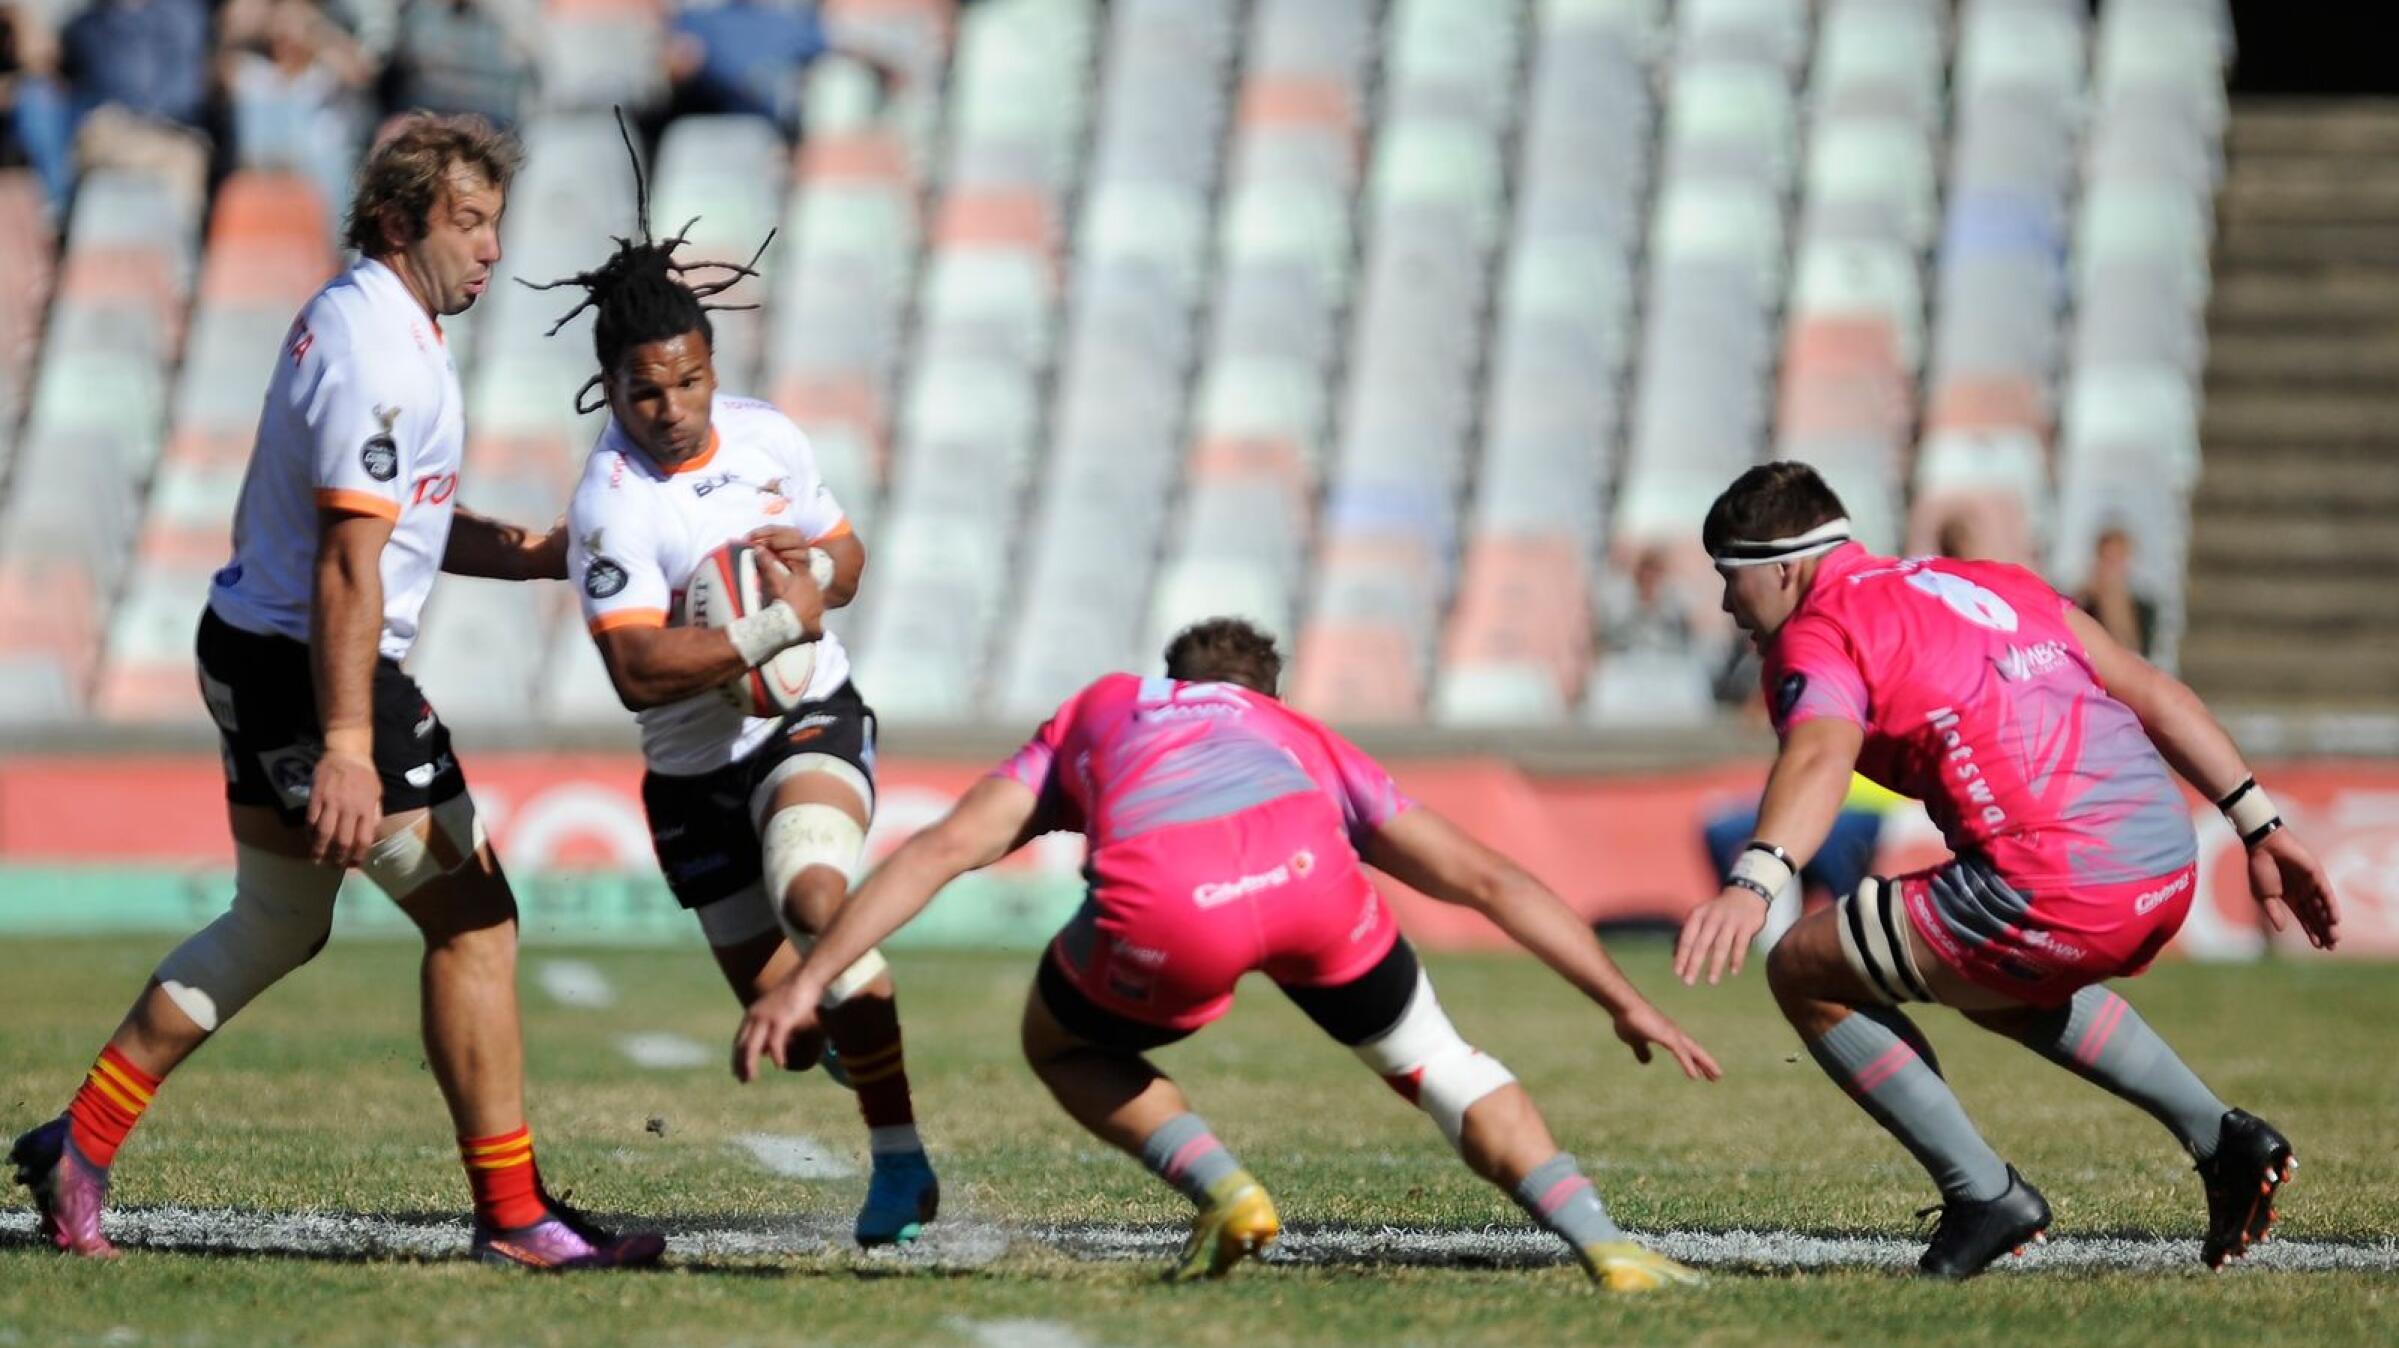 Rosko Specman Free State Cheetahs runs with the ball during their Currie Cup semi-final match against the Pumas at Toyota Stadium in Bloemfontein on Saturday. The Pumas stunned the Cheetahs to set up a final meeting in Kimberley against Griquas